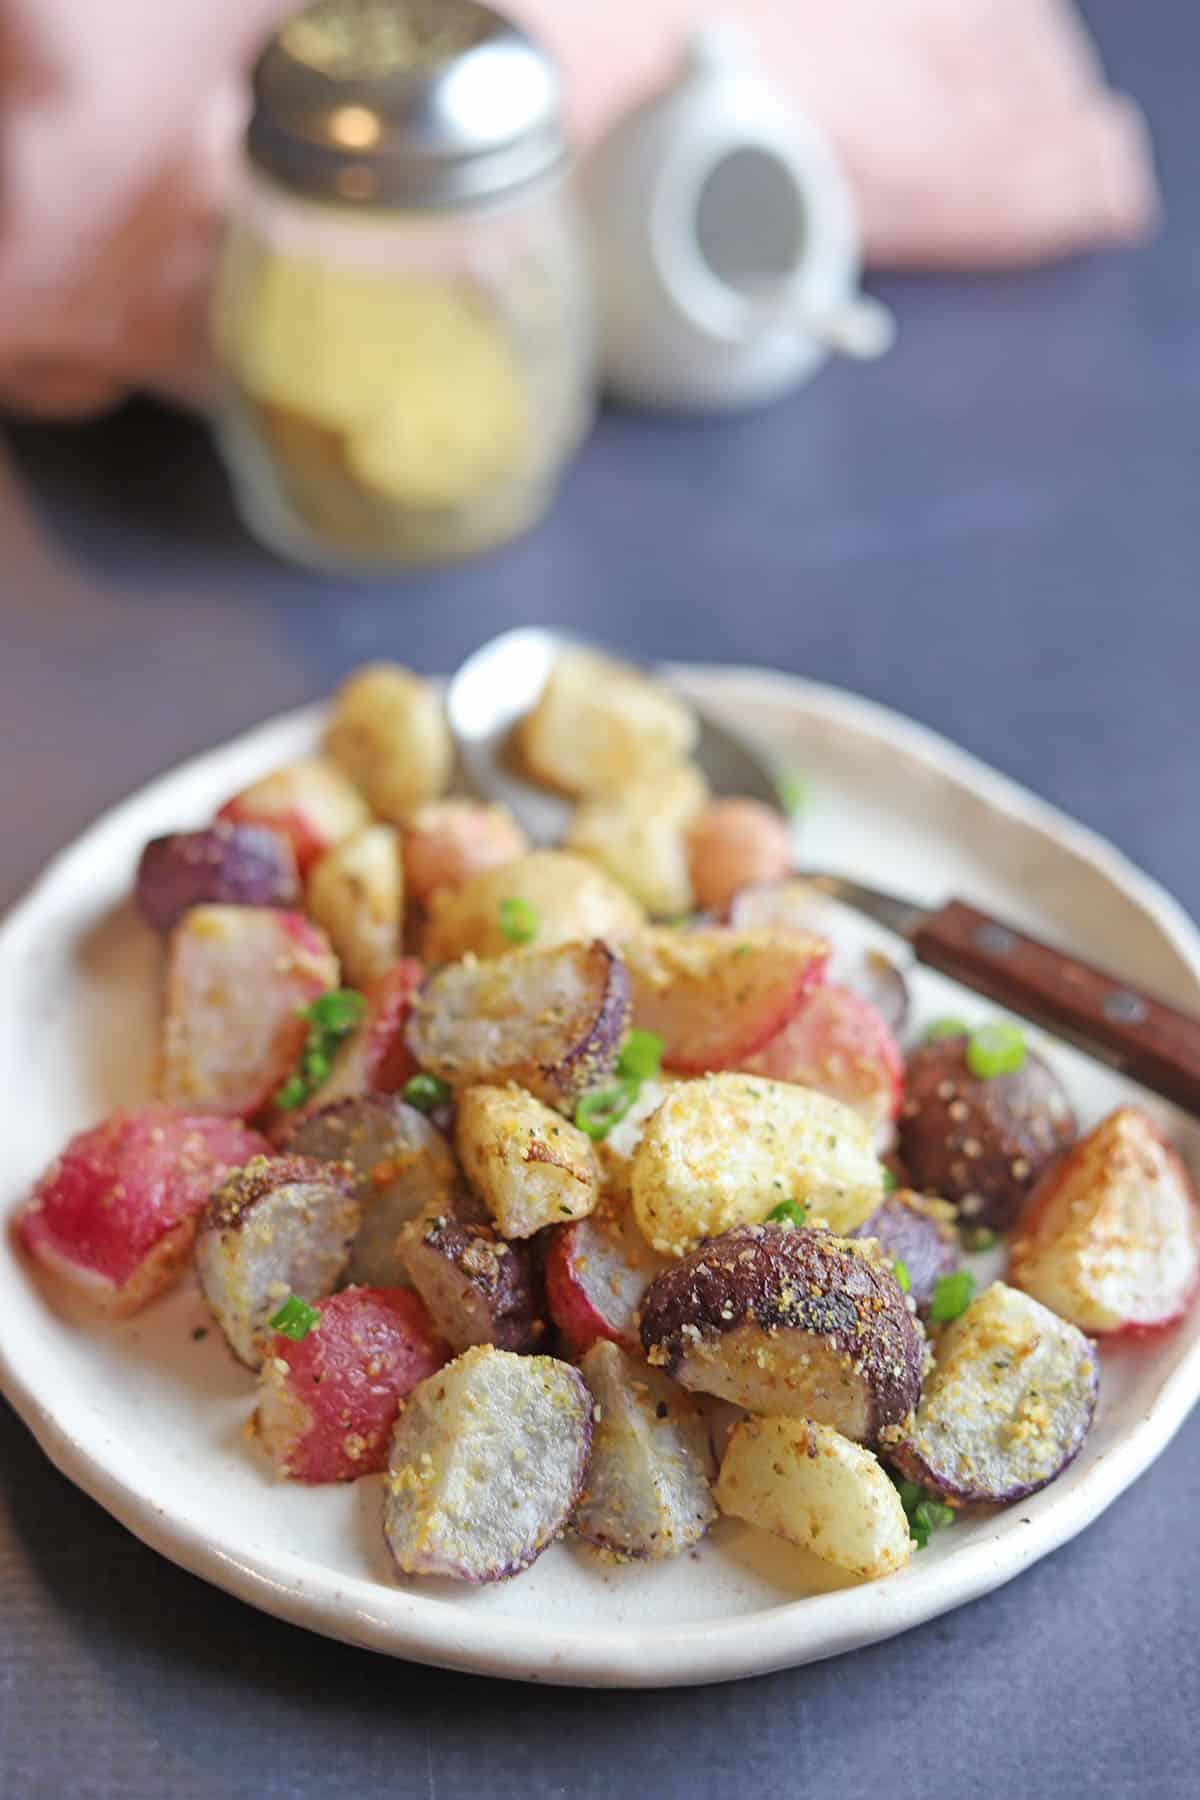 Roasted radishes on plate by cashew parmesan and salt.